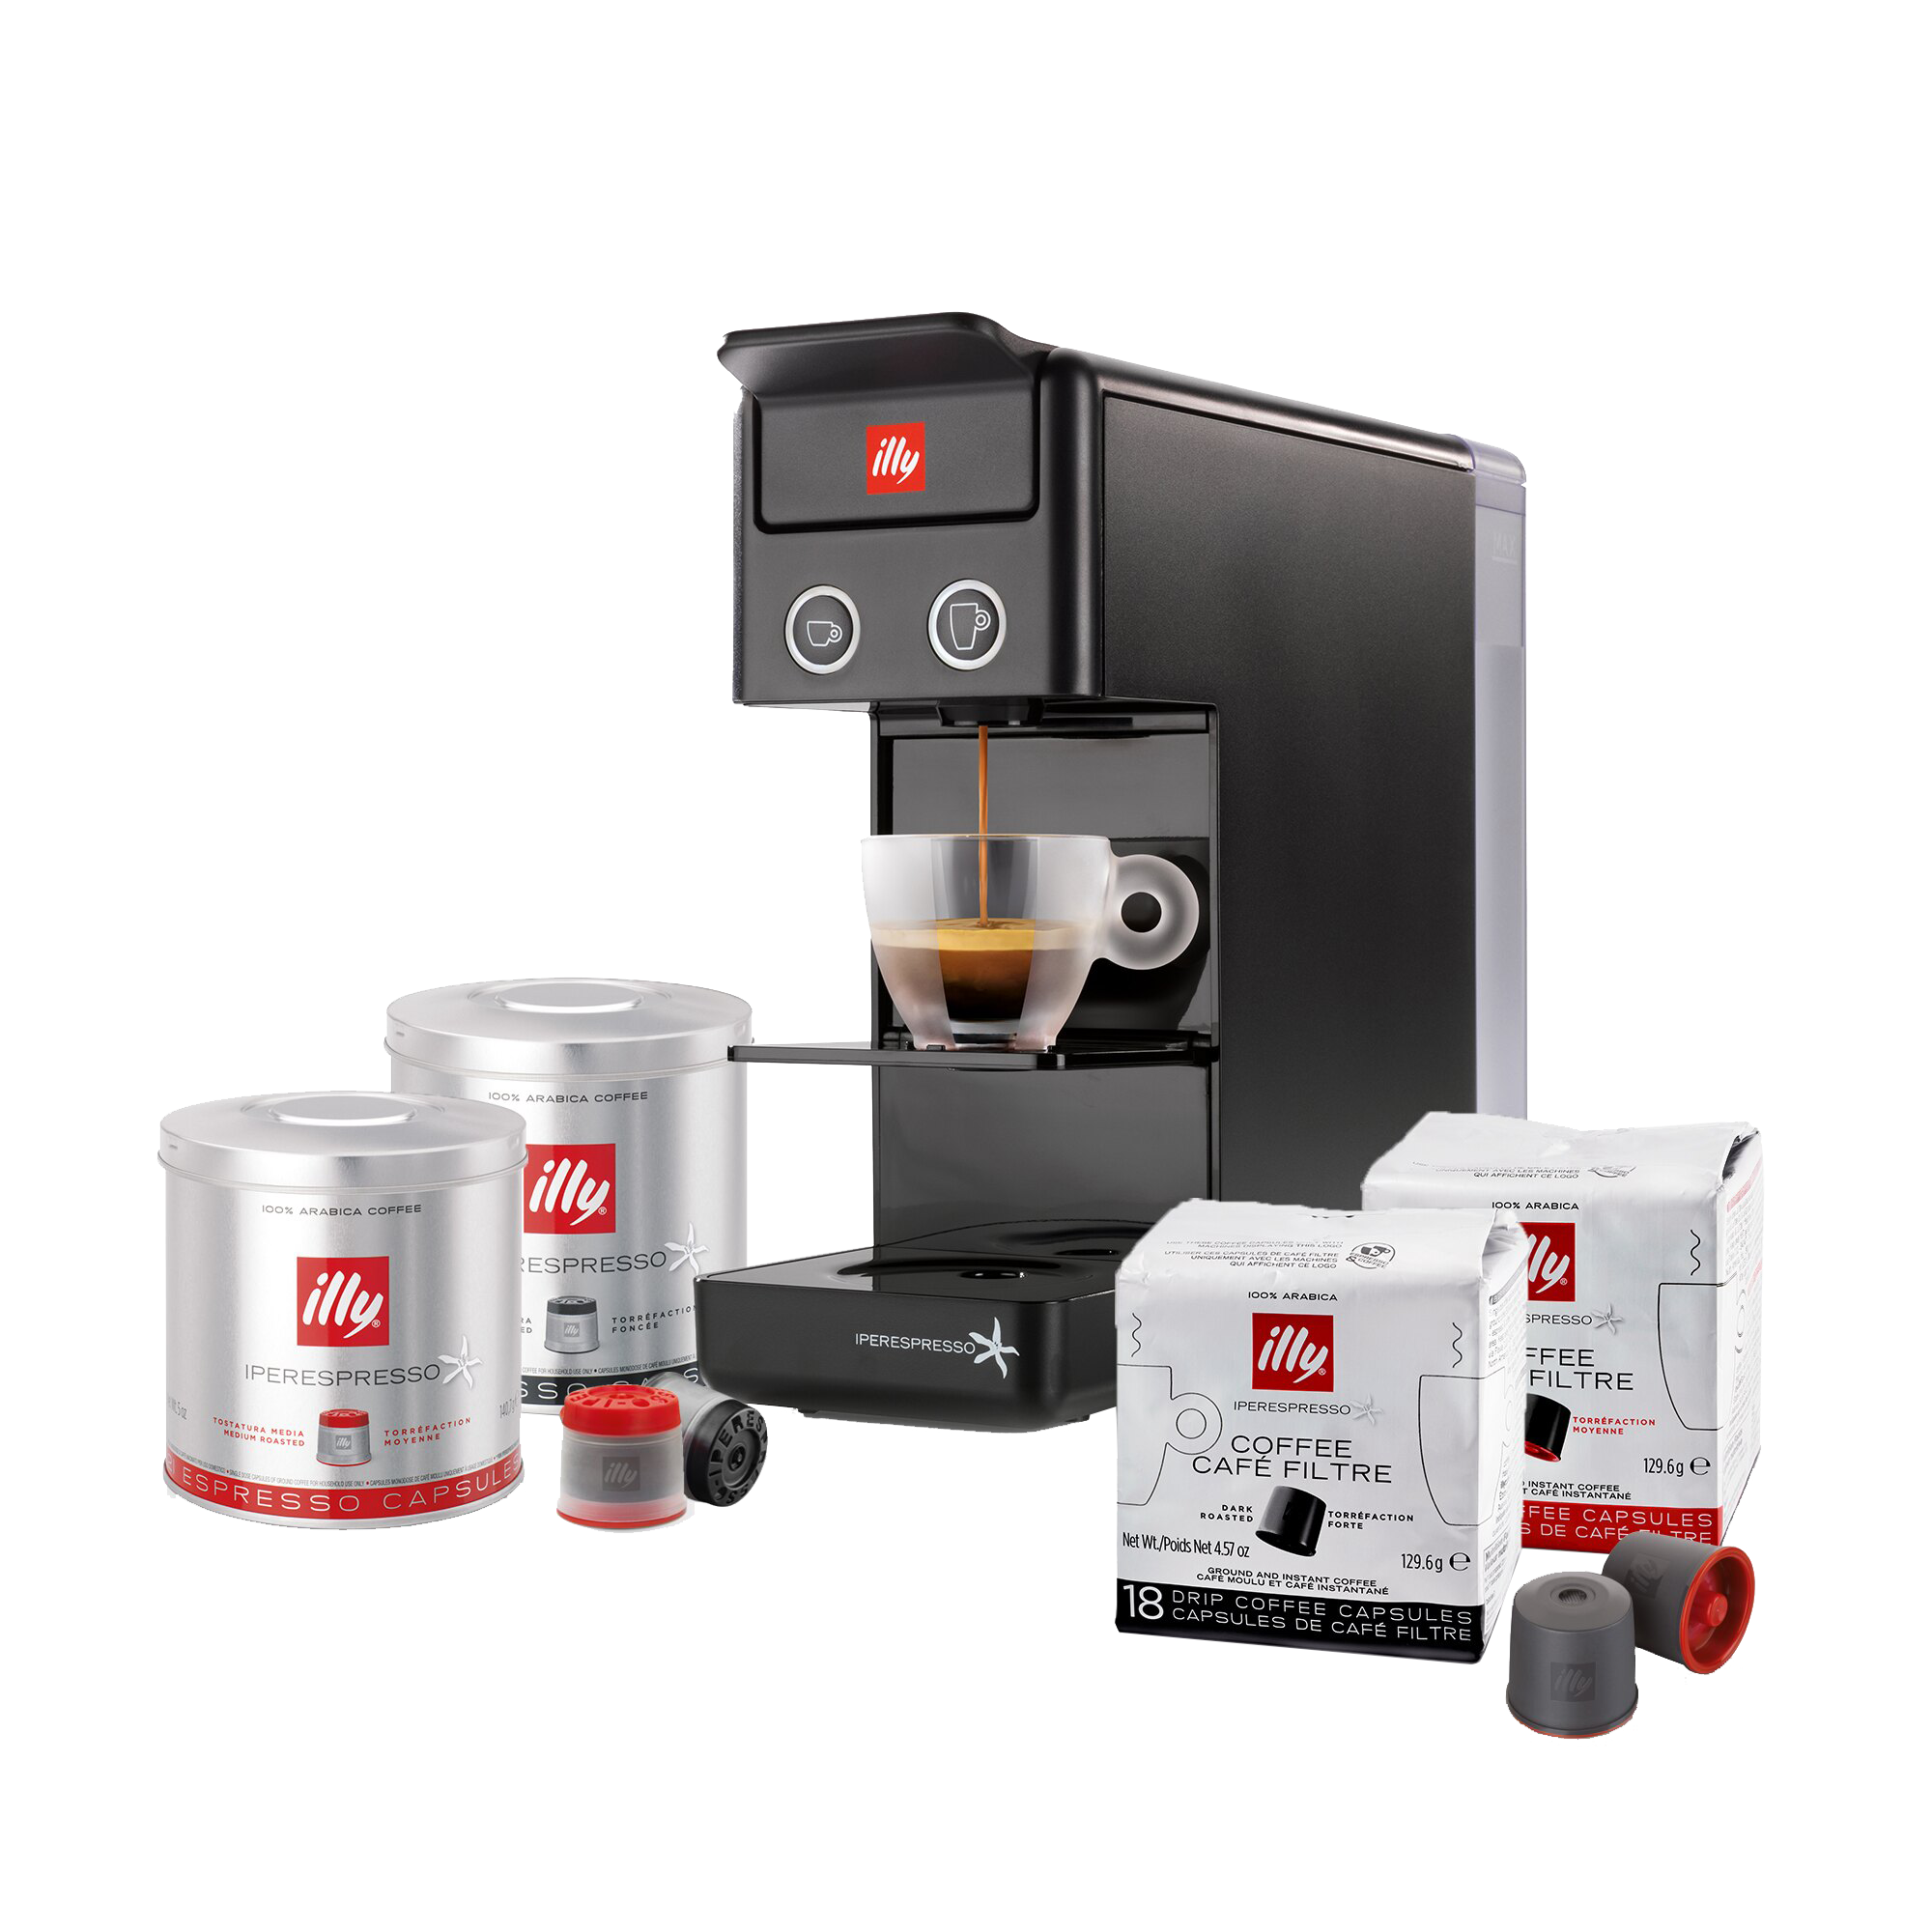 https://www.illy.com/on/demandware.static/-/Sites-masterCatalog_illycaffe/default/dw2d33238e/products/Others/GiftBoxes/US_Bundles/D019_Y3.2Black.png